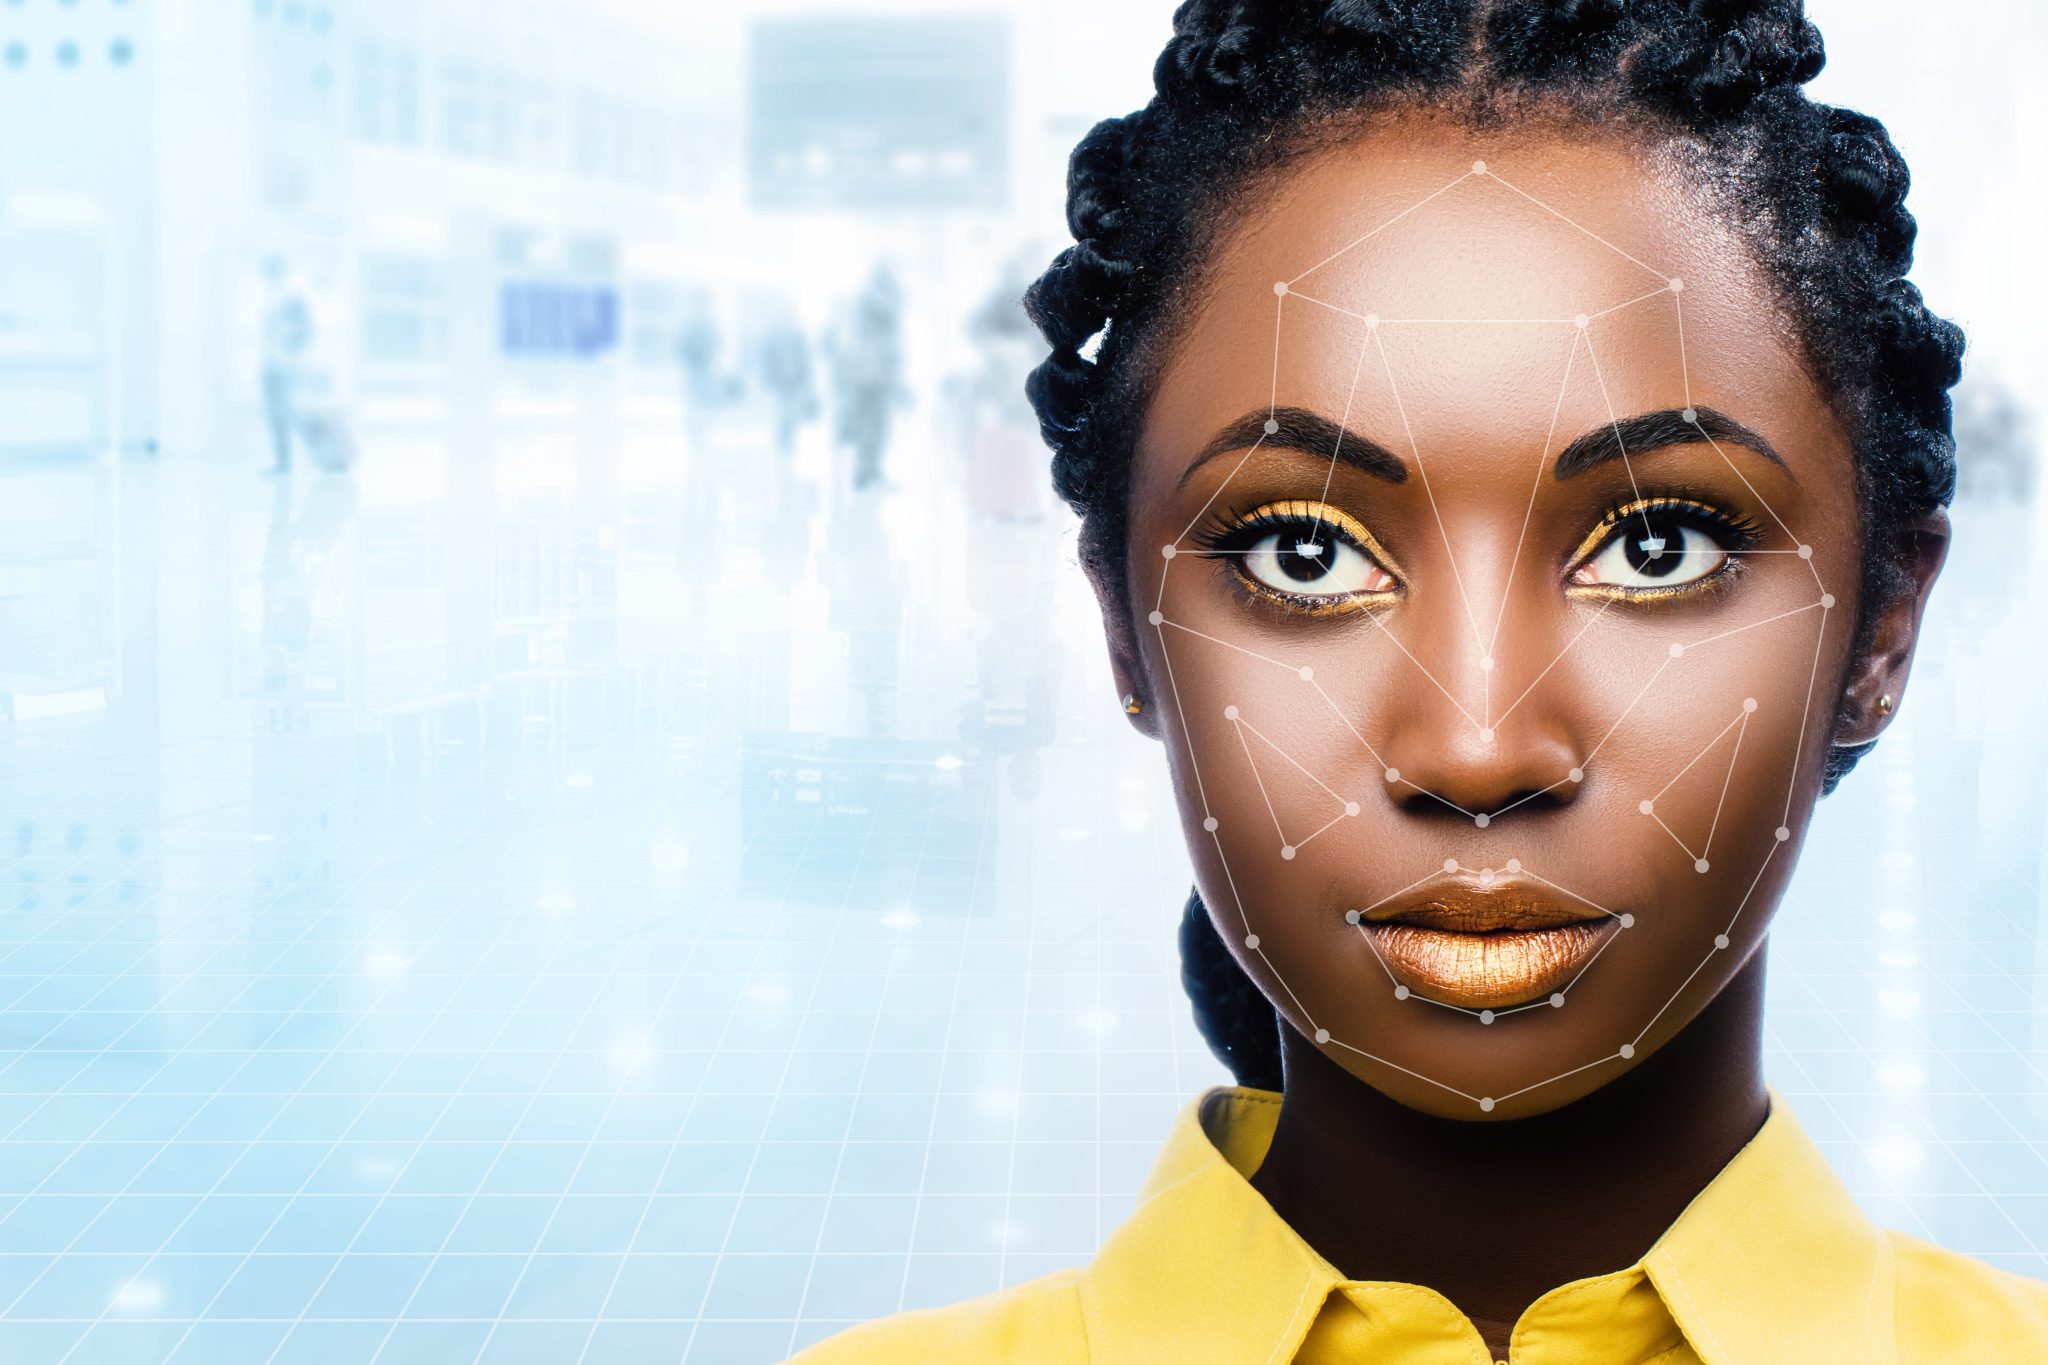 Vicon, Intel each introduce face biometrics solutions for access control